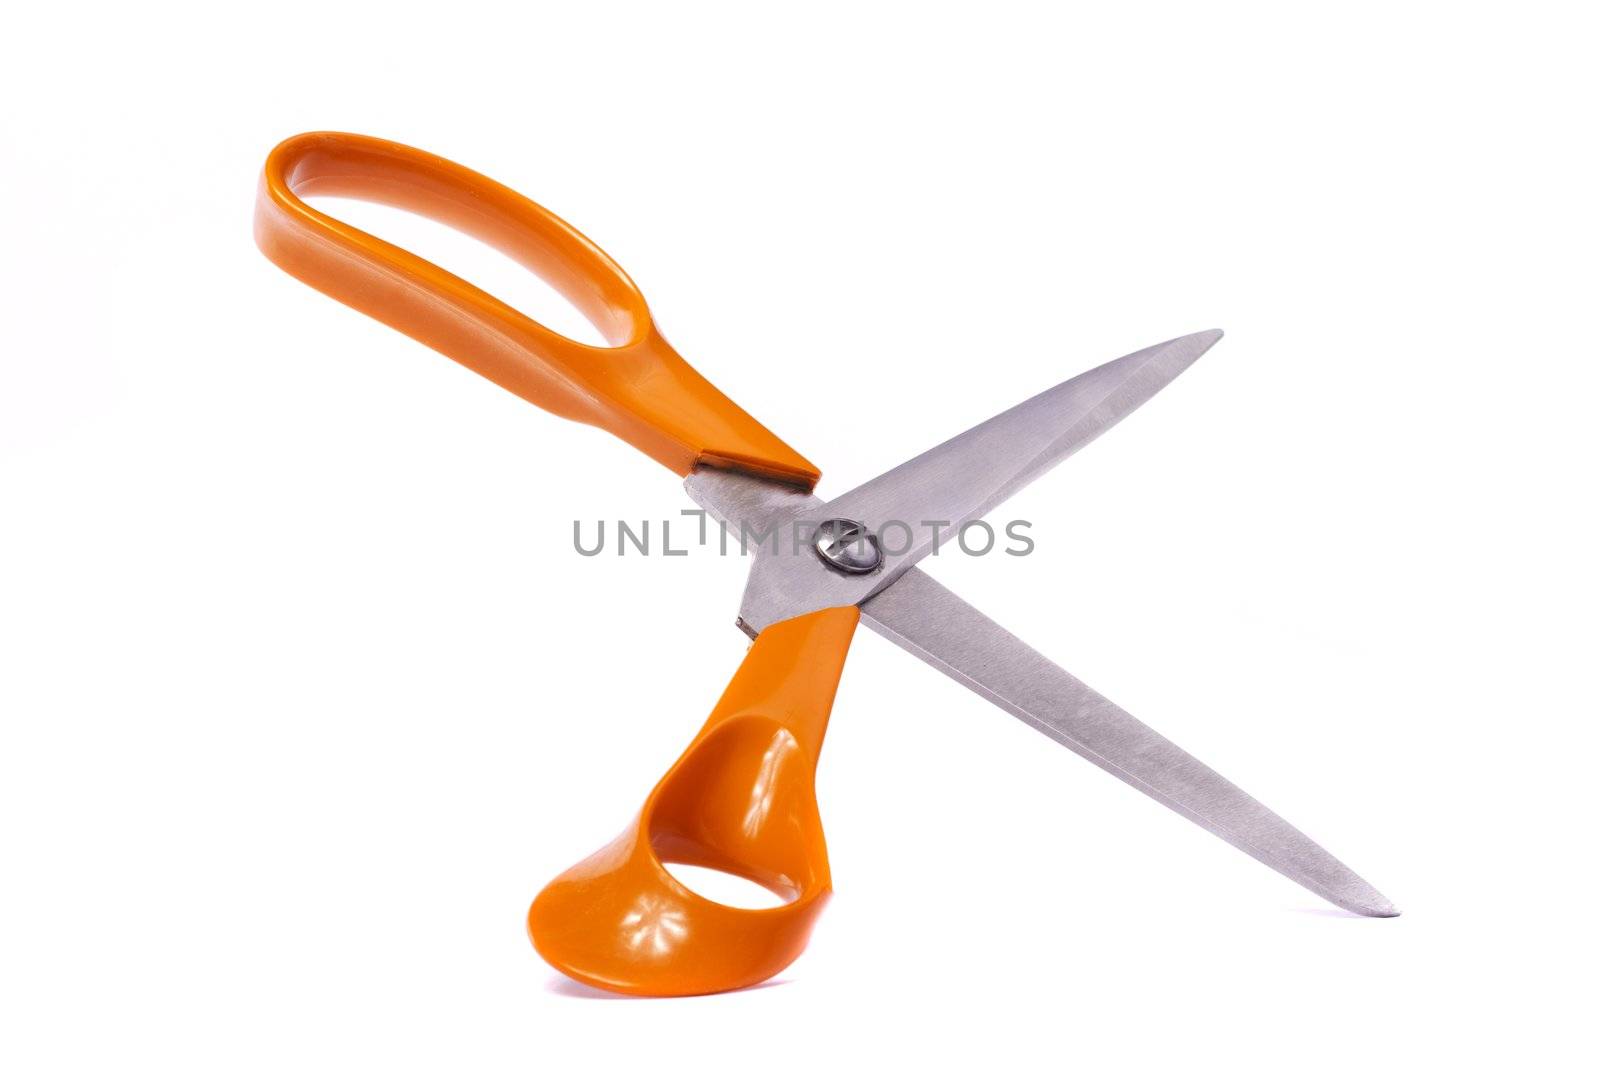 Close up view of an orange scissor isolated on a white background.